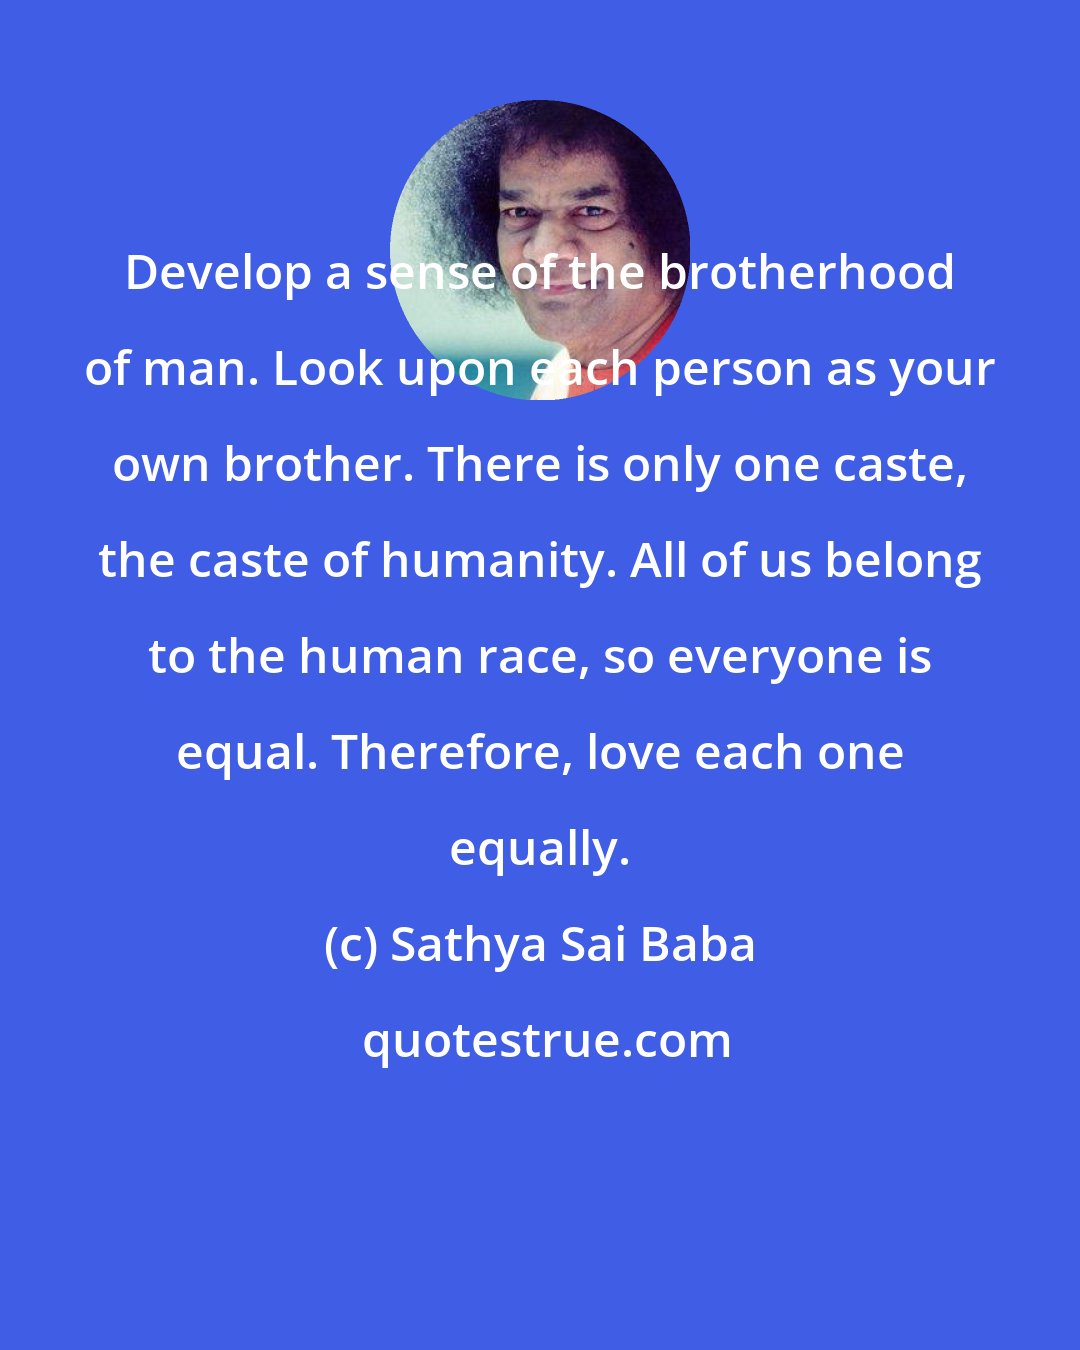 Sathya Sai Baba: Develop a sense of the brotherhood of man. Look upon each person as your own brother. There is only one caste, the caste of humanity. All of us belong to the human race, so everyone is equal. Therefore, love each one equally.